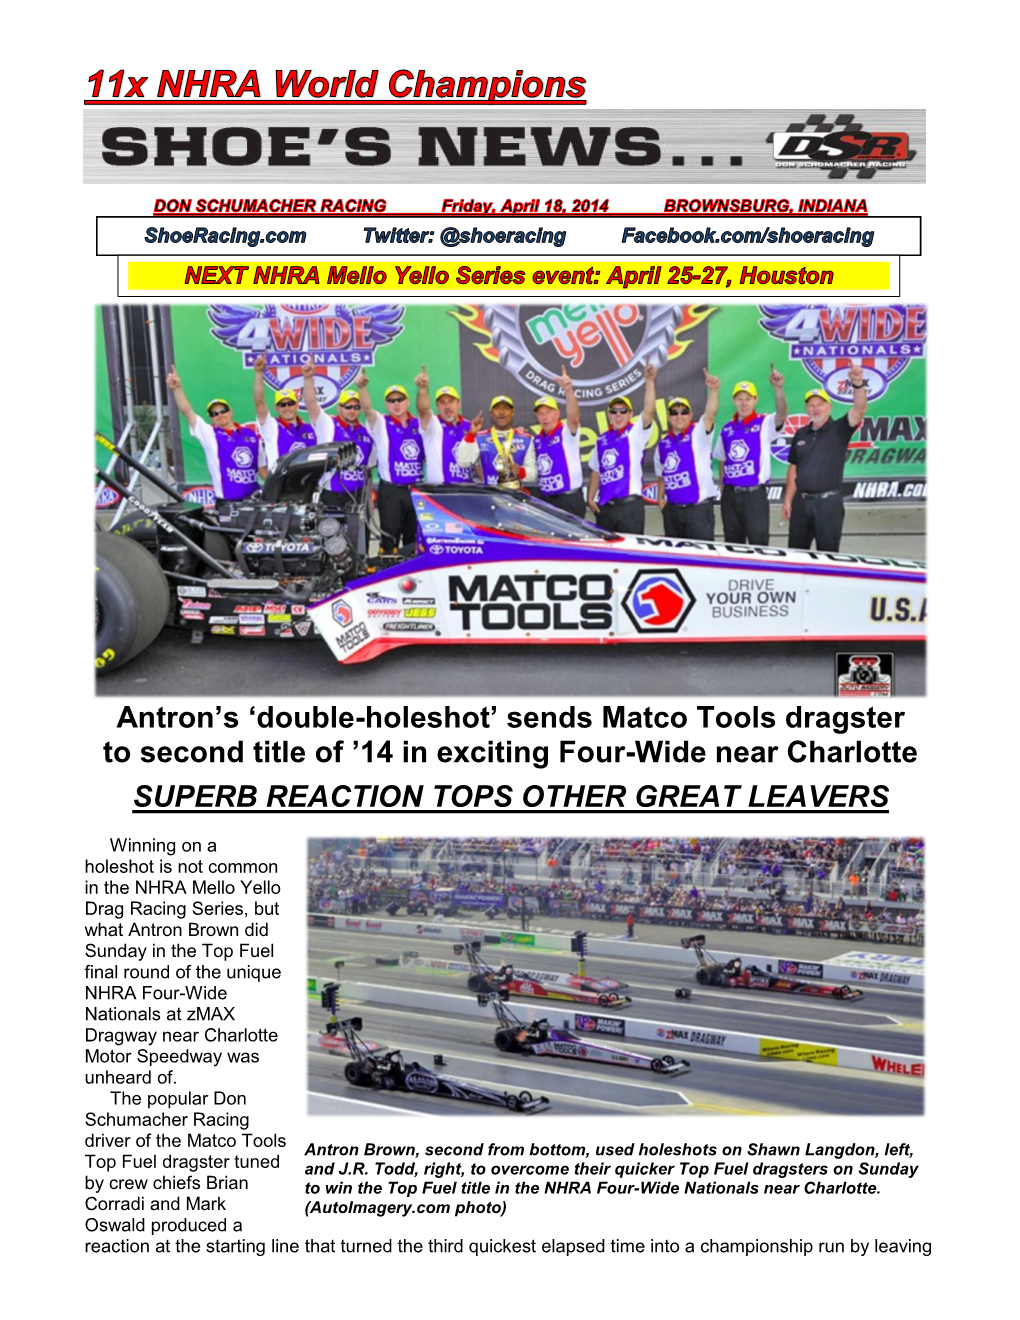 Antron's 'Double-Holeshot' Sends Matco Tools Dragster to Second Title Of